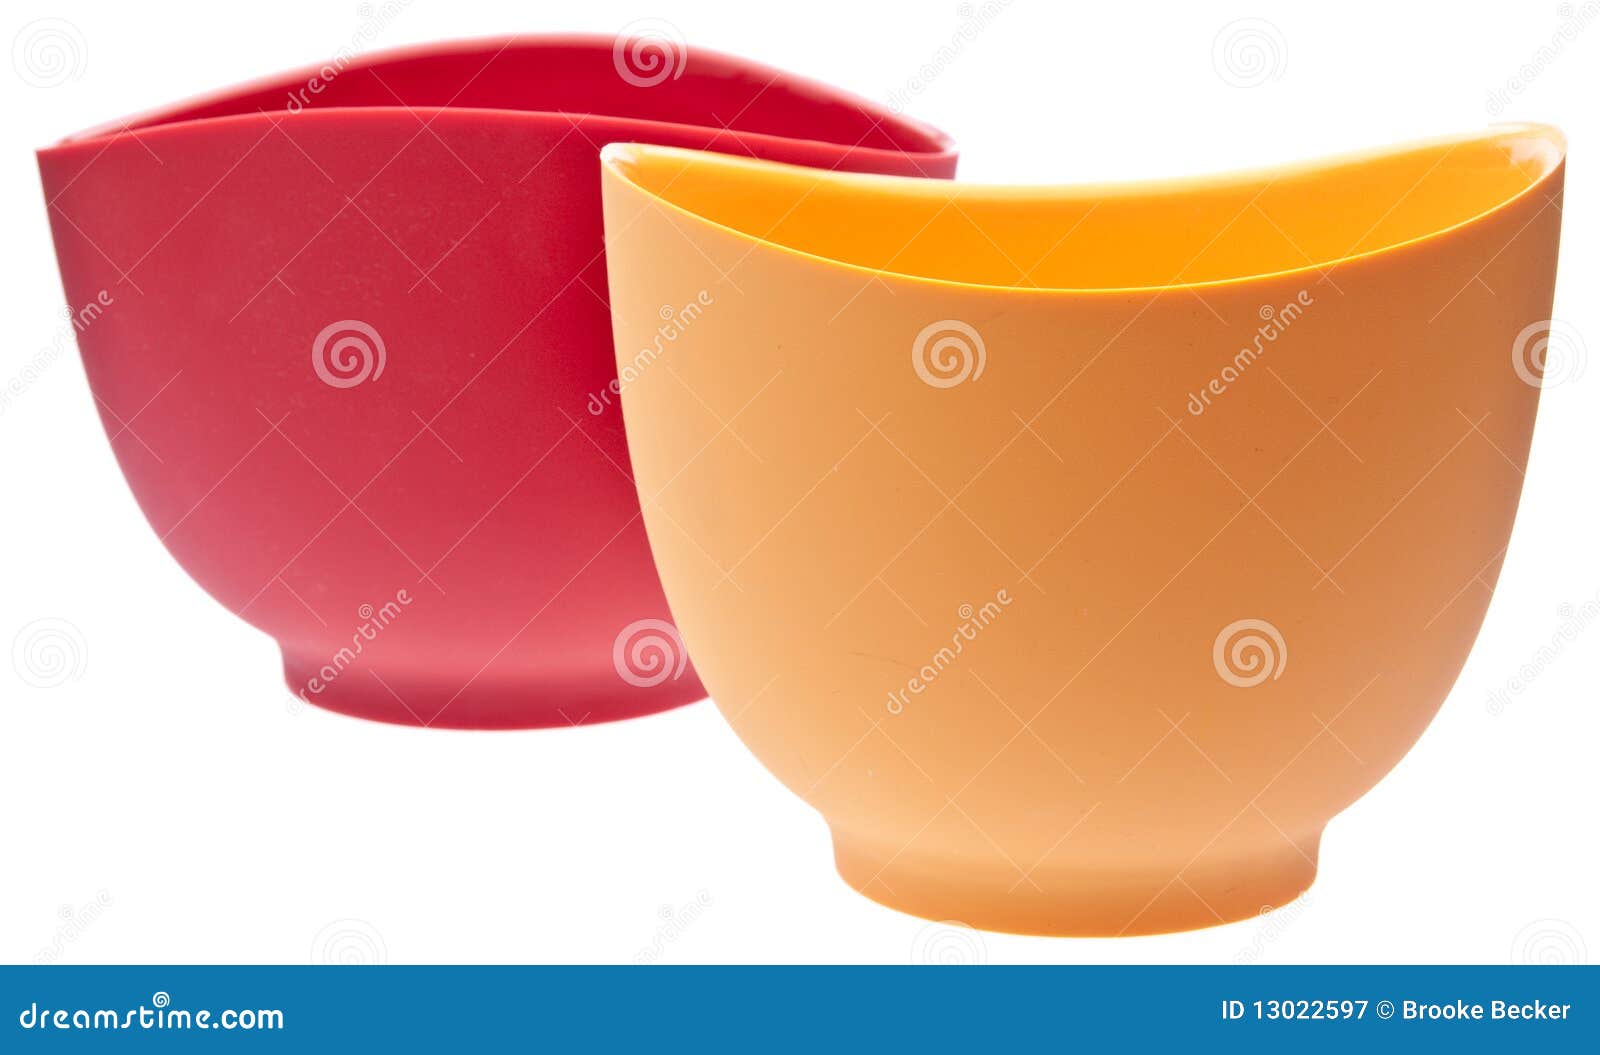 113+ Thousand Color Mixing Bowl Royalty-Free Images, Stock Photos